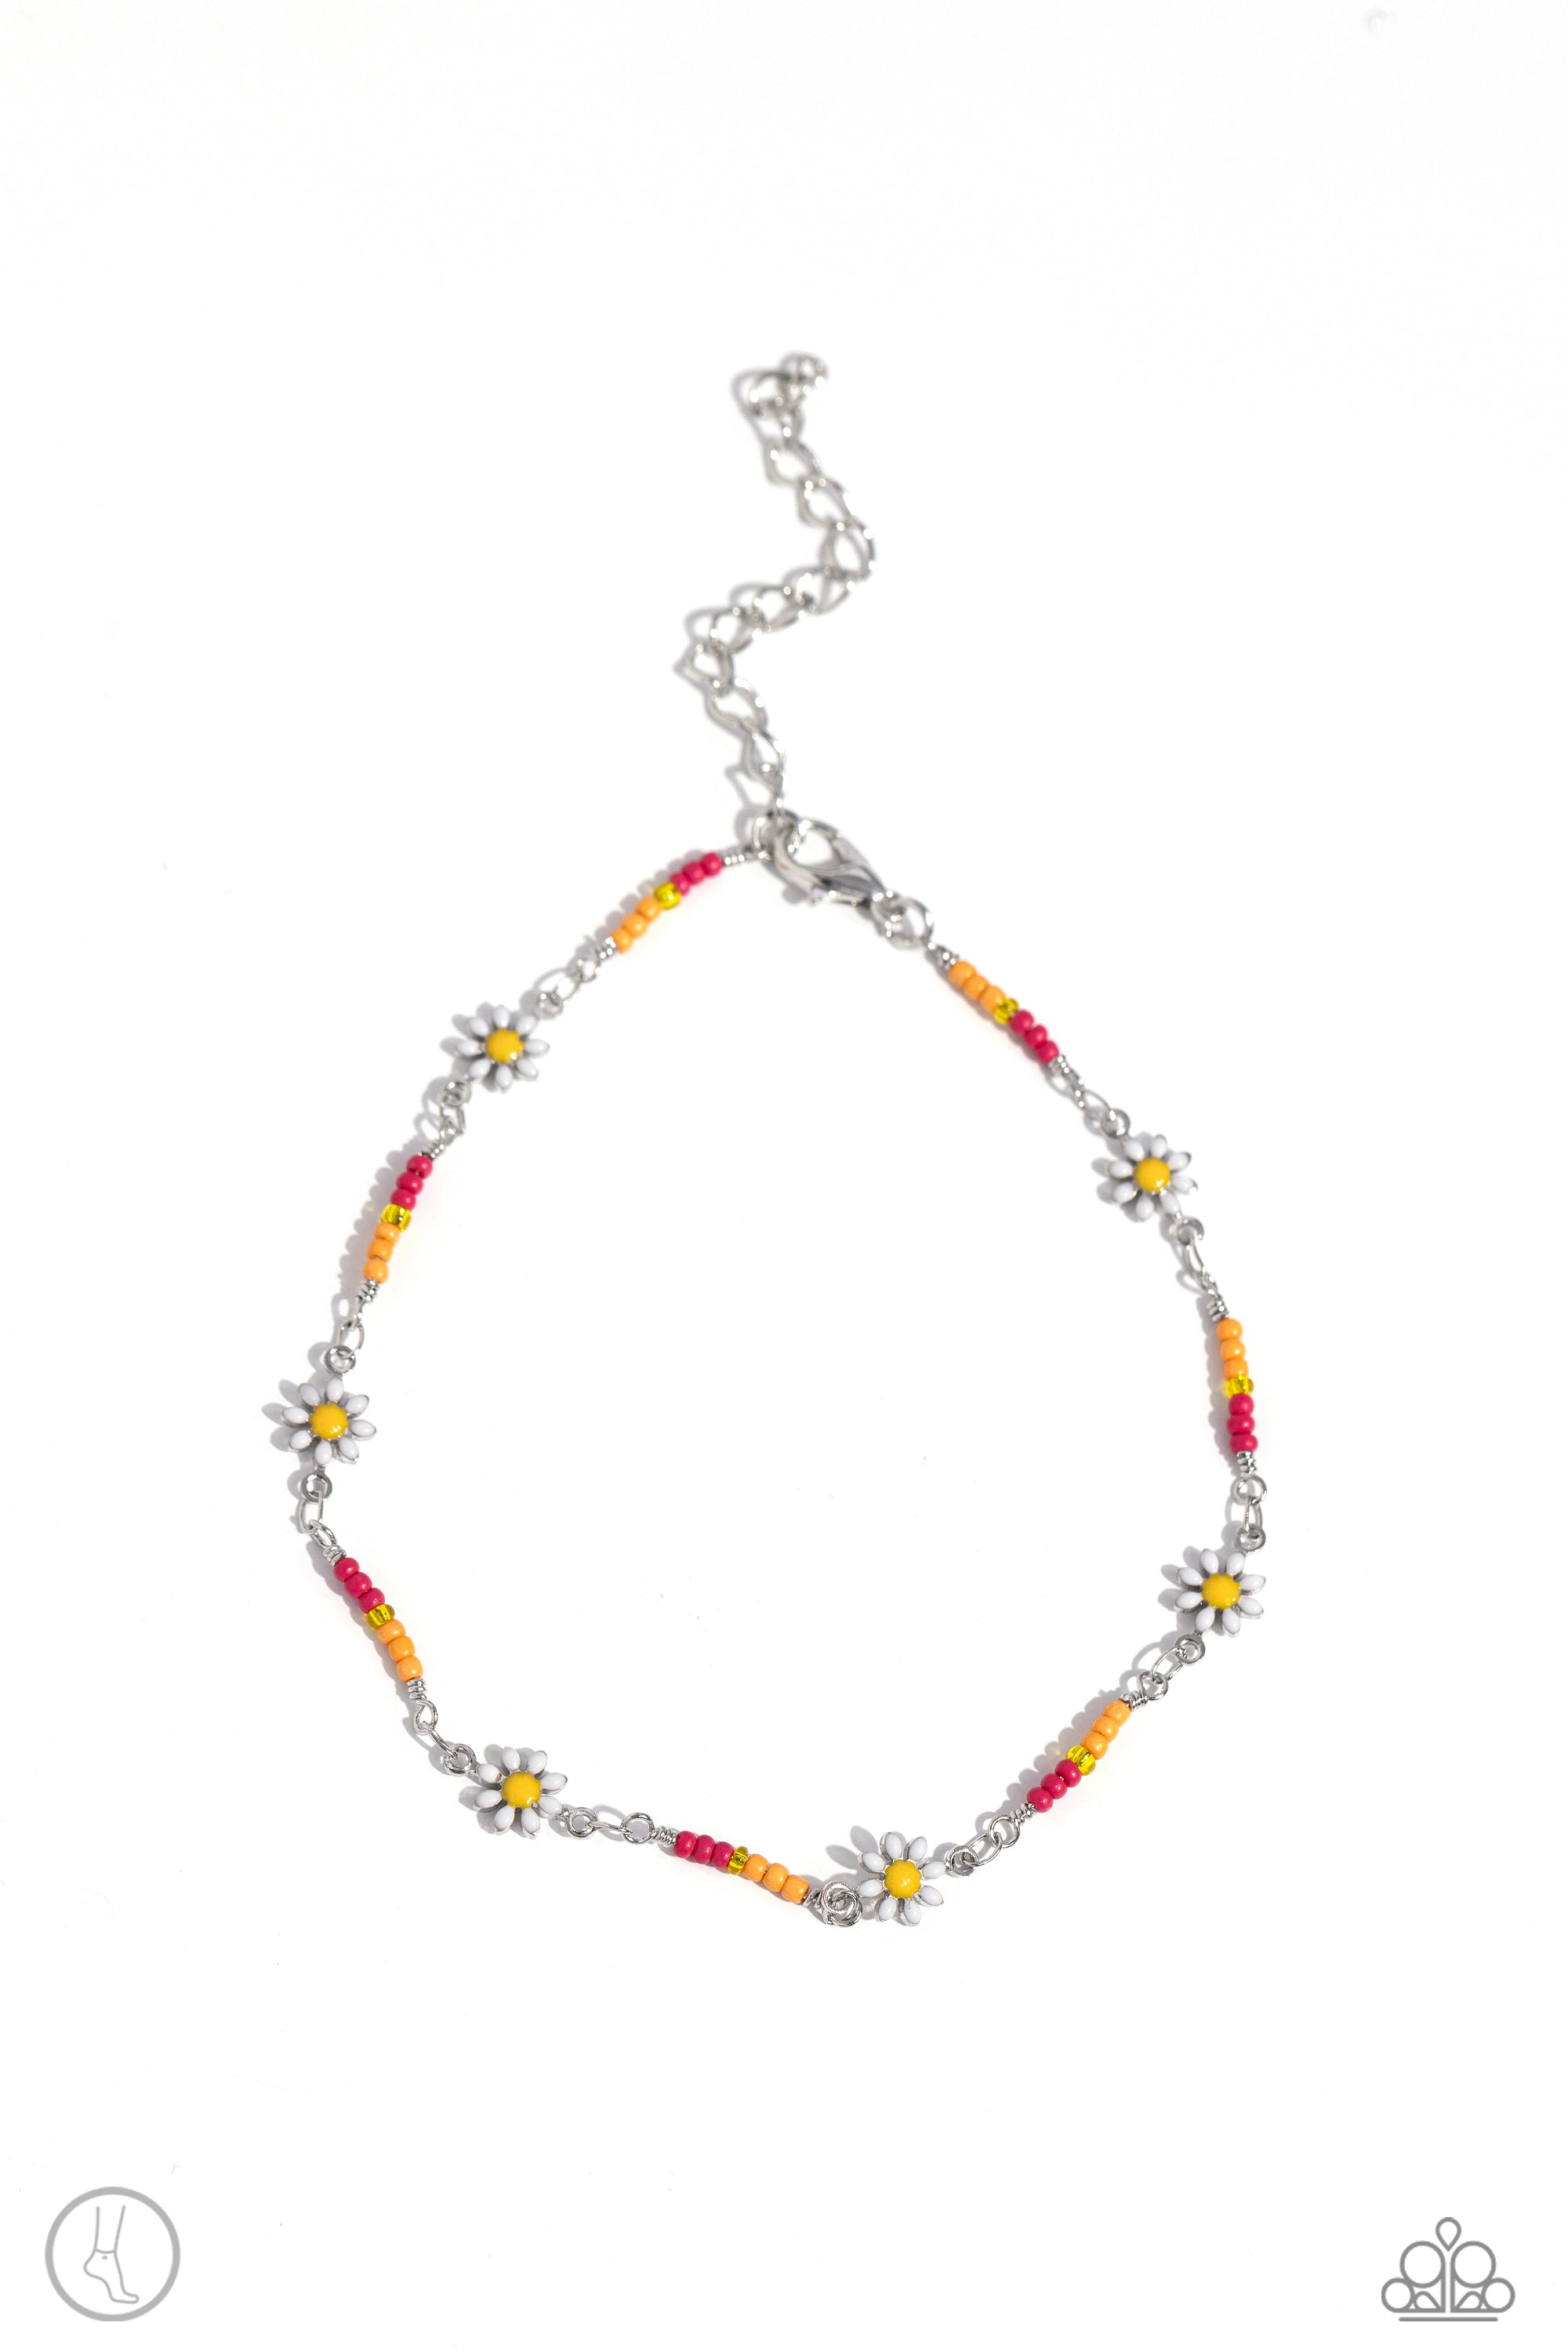 Sweetest Daydream Pink & Multi Floral Anklet - Paparazzi Accessories- lightbox - CarasShop.com - $5 Jewelry by Cara Jewels